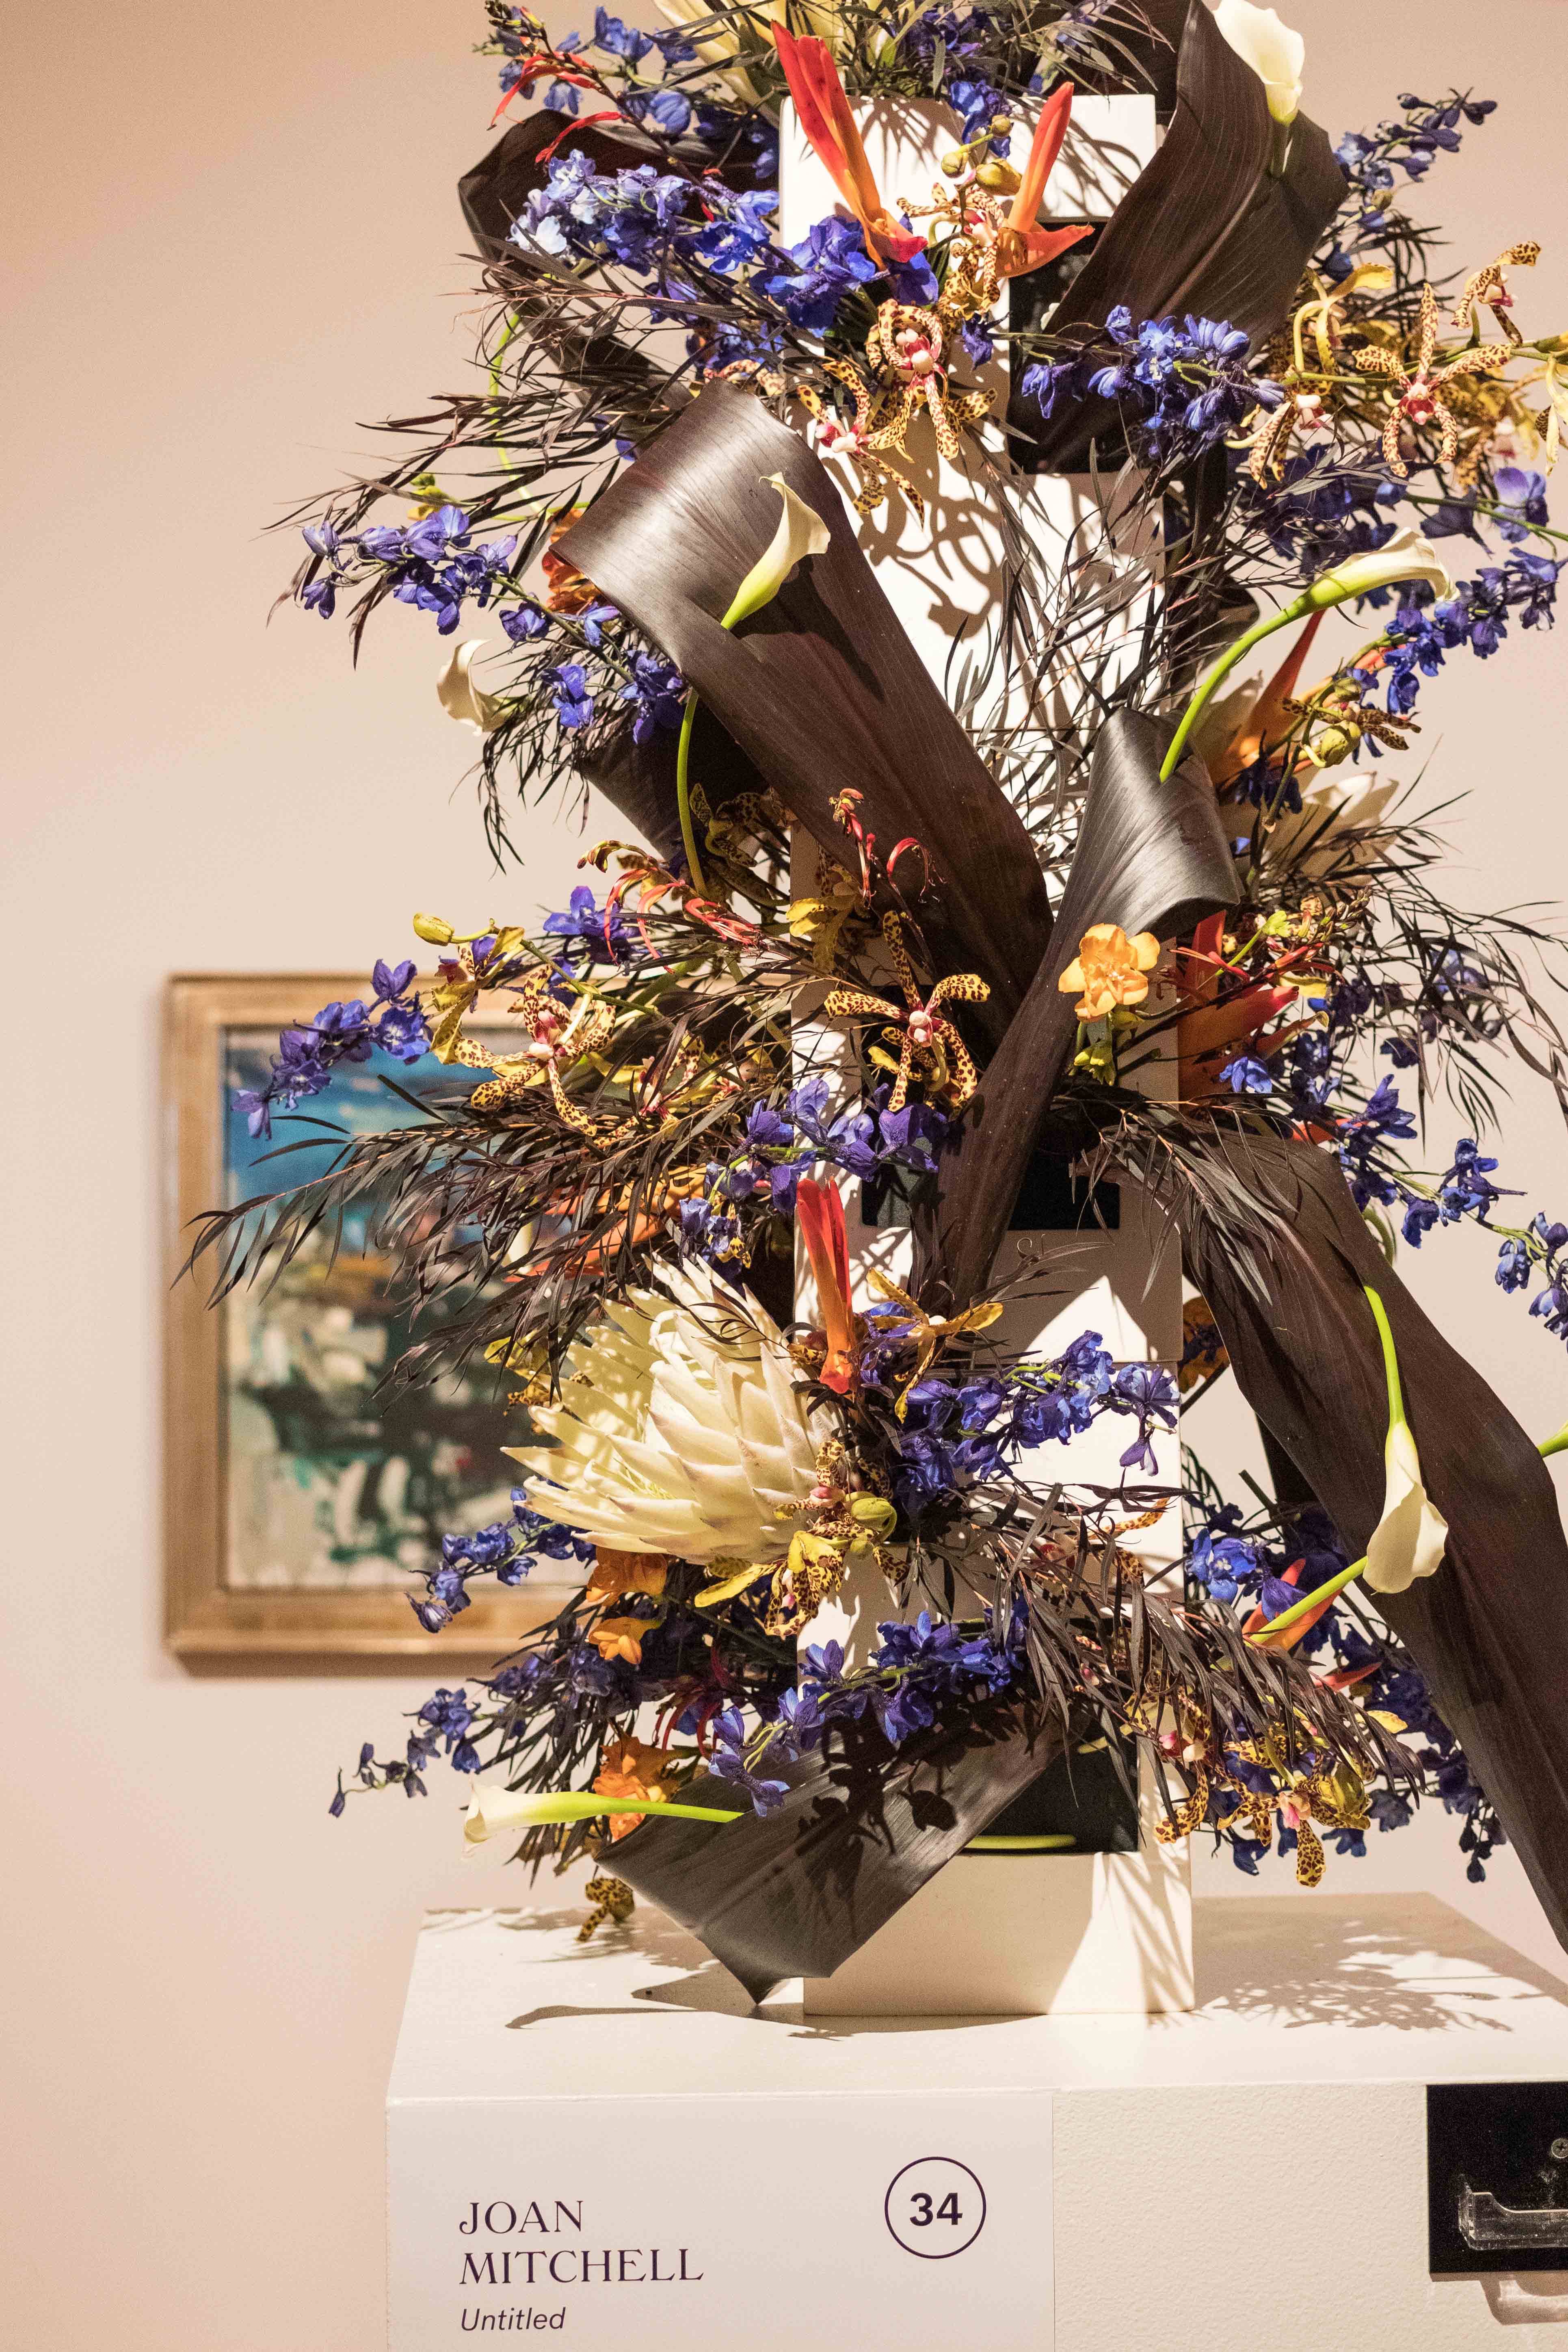 Art in Bloom 2019 at the Milwaukee Art Museum, Milwaukee, WI #ArtinBloom #floralshow #MilwaukeeArtMuseum | https://www.roseclearfield.com